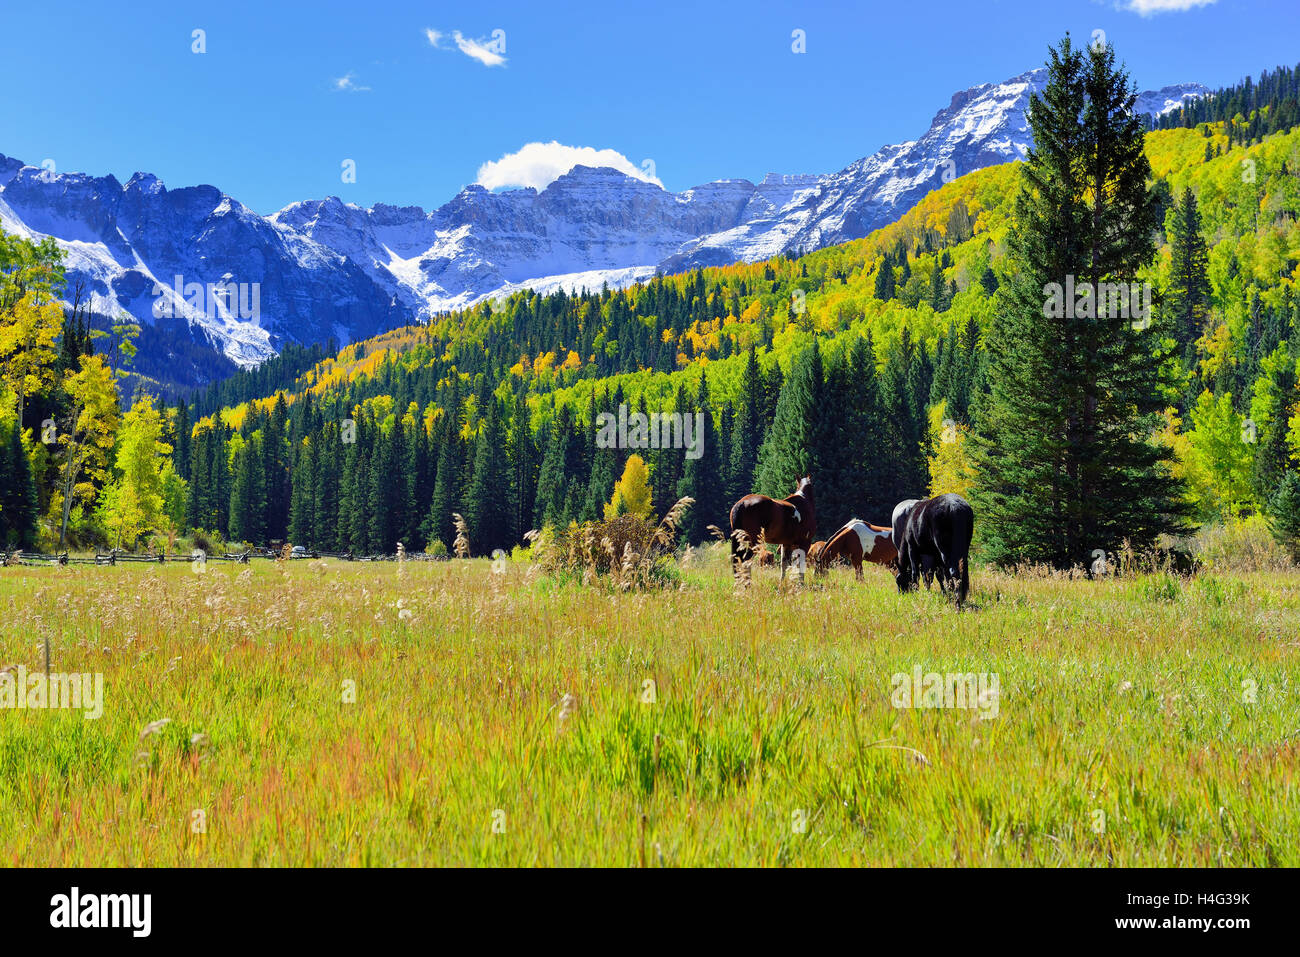 grazing horse in the alpine scenery during foliage season near county road 7 Stock Photo